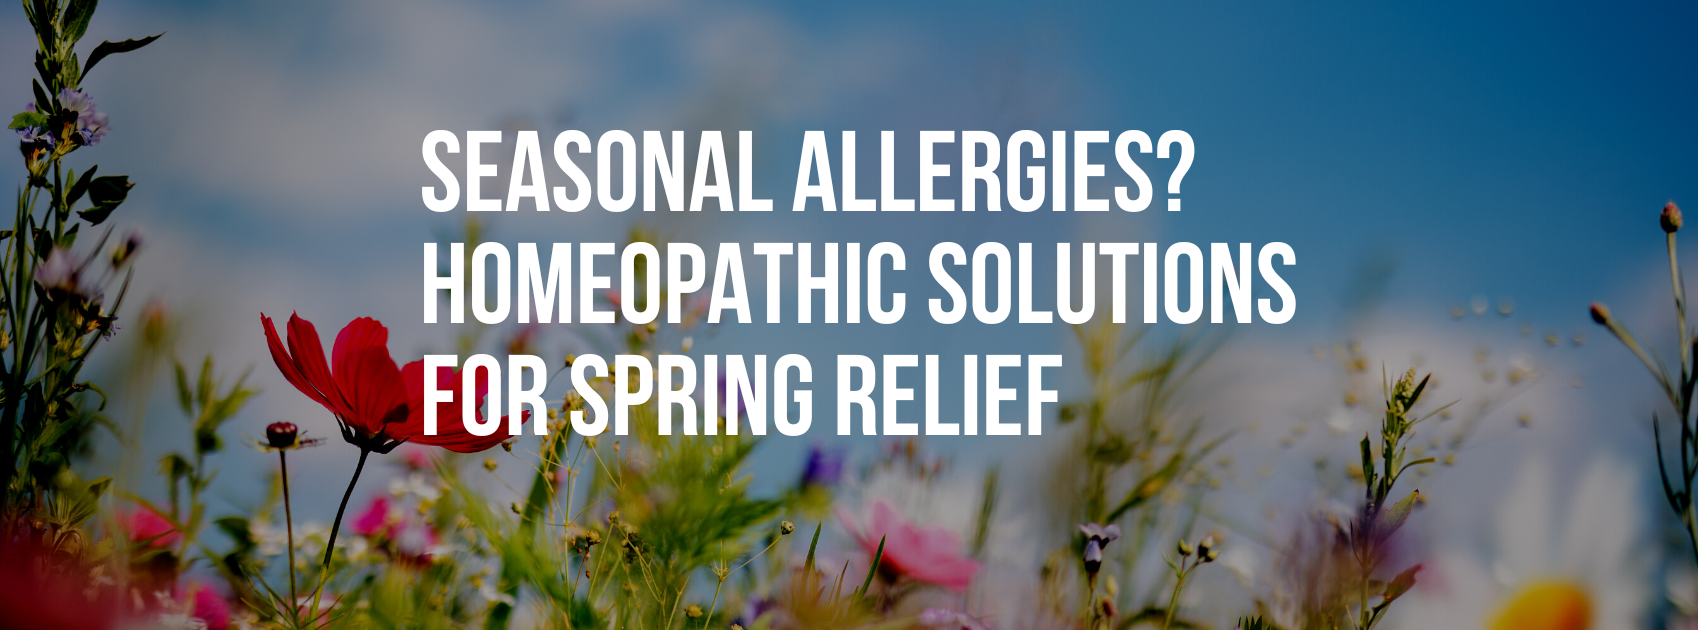 Seasonal Allergies? Homeopathic Solutions for Spring Relief